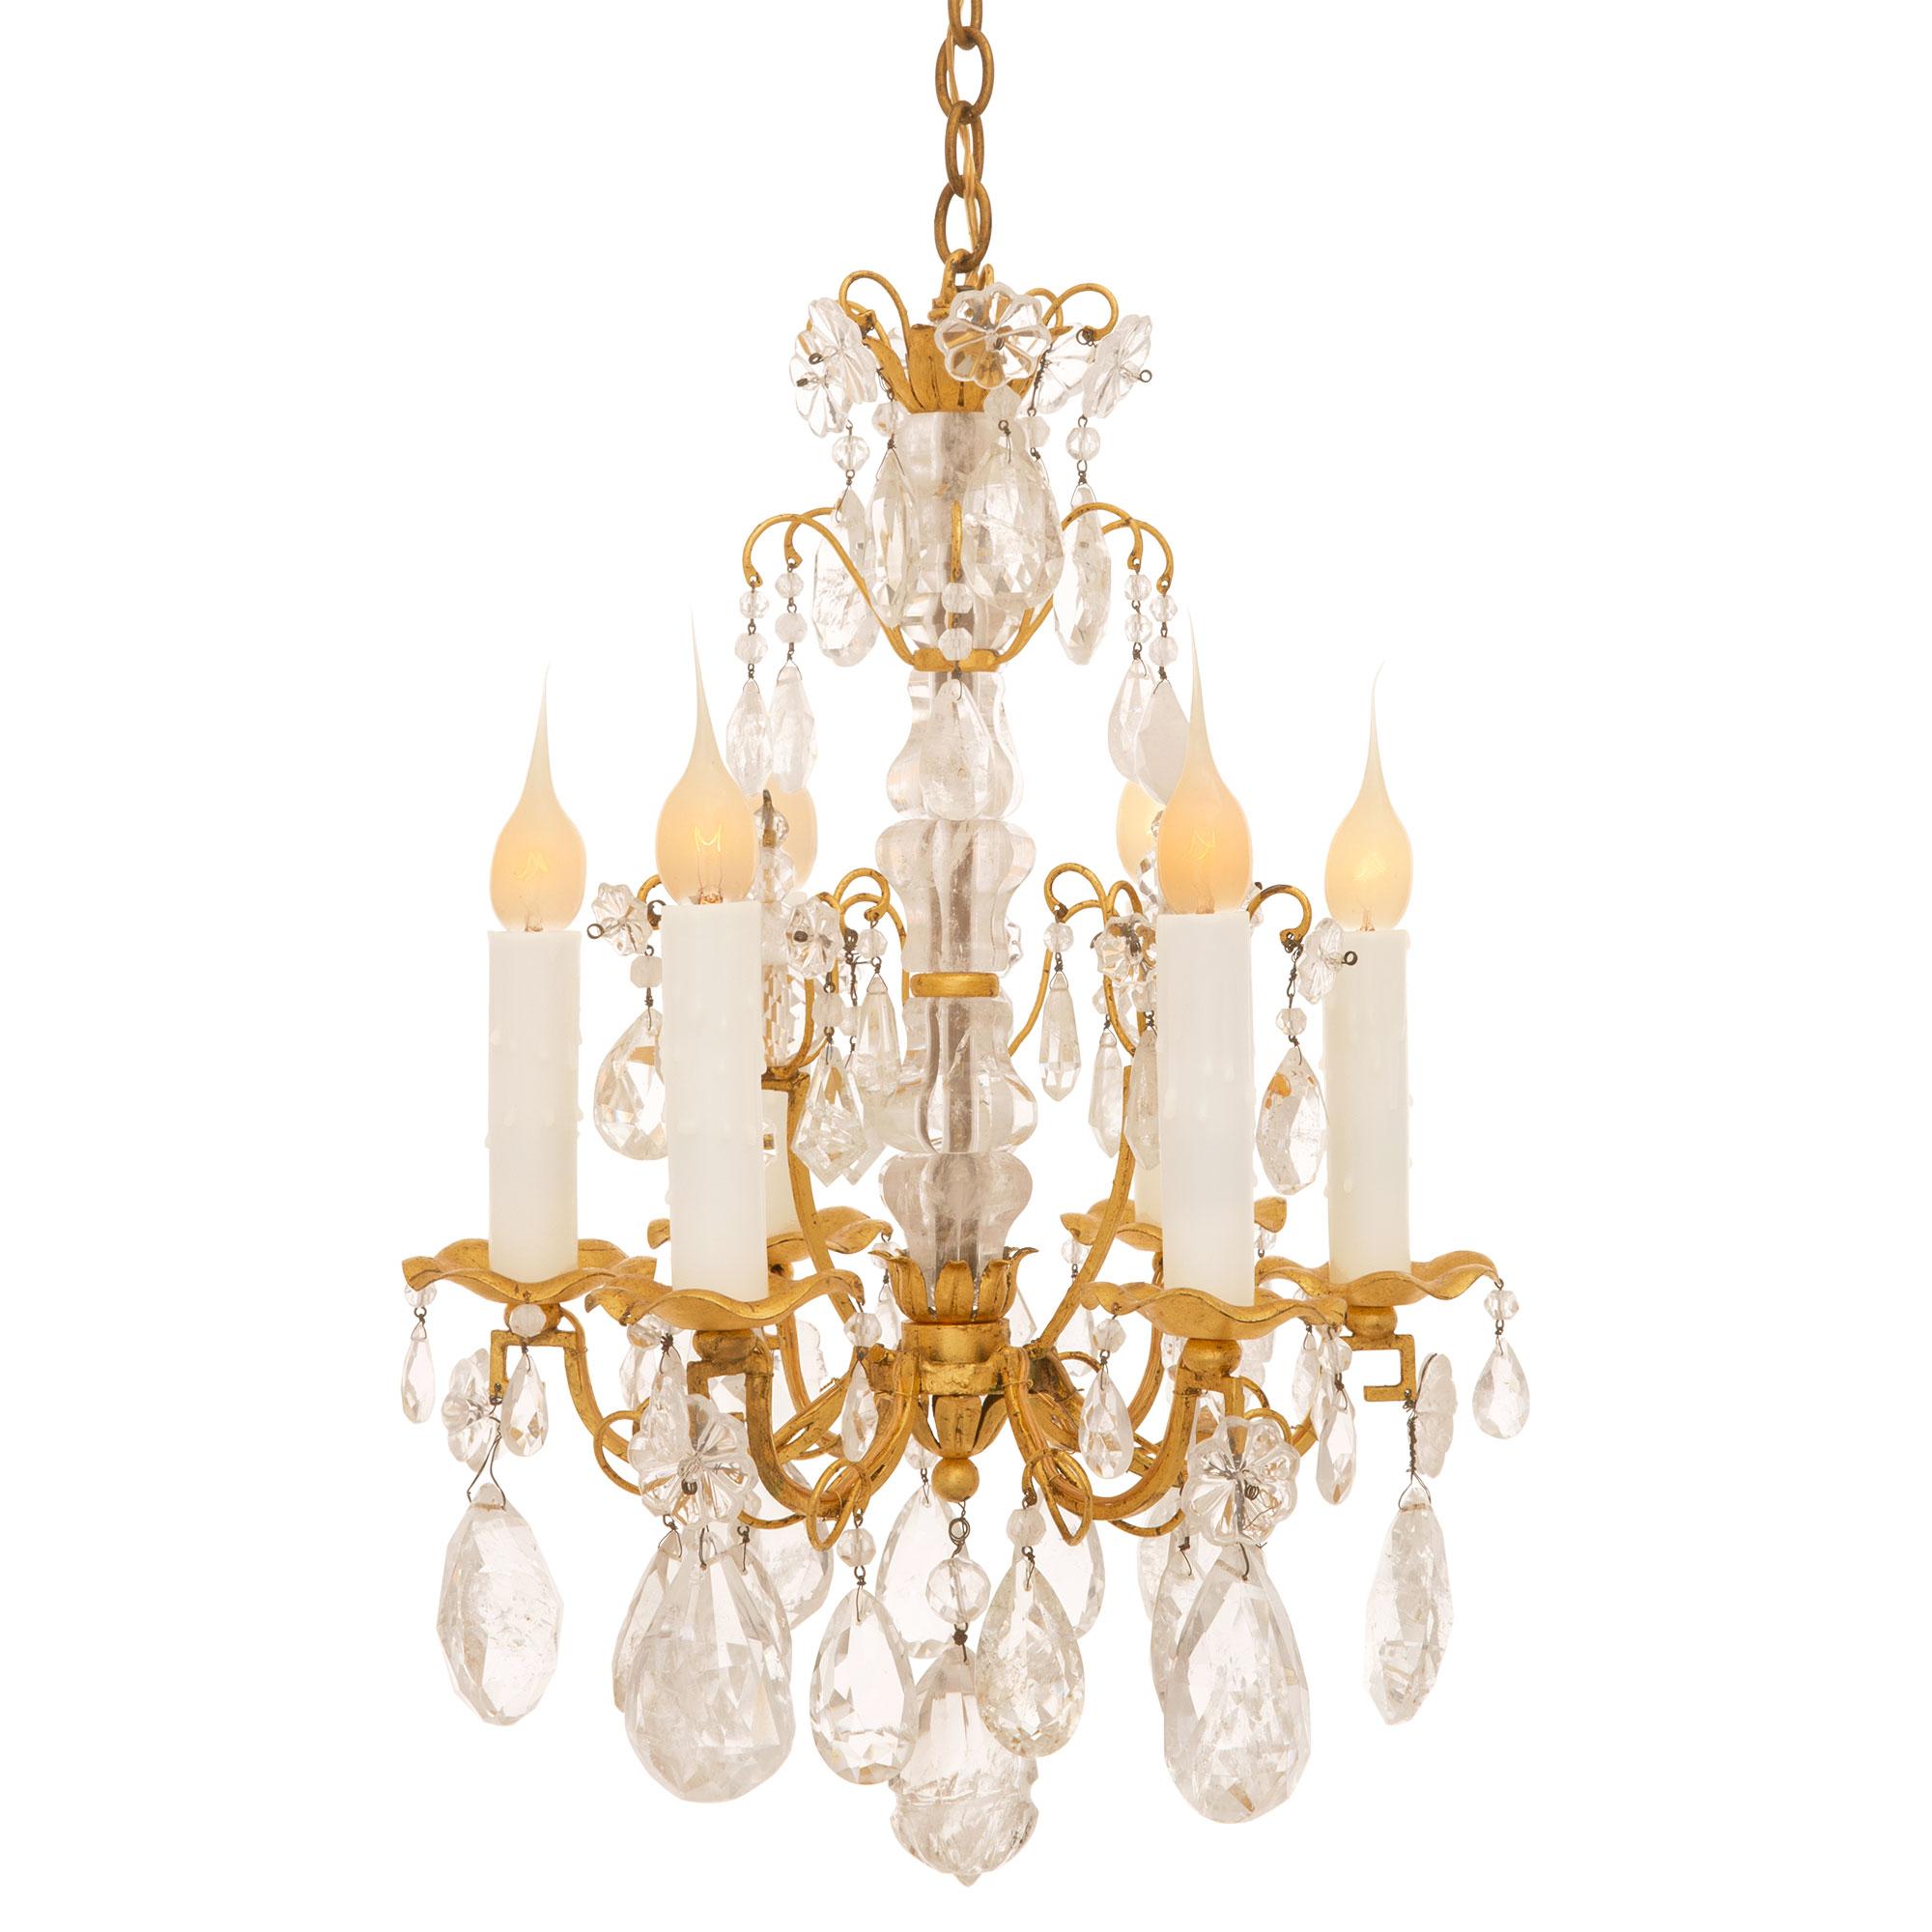 Italian Early 19th Century Louis XVI St. Gilt Metal And Rock Crystal Chandelier For Sale 5